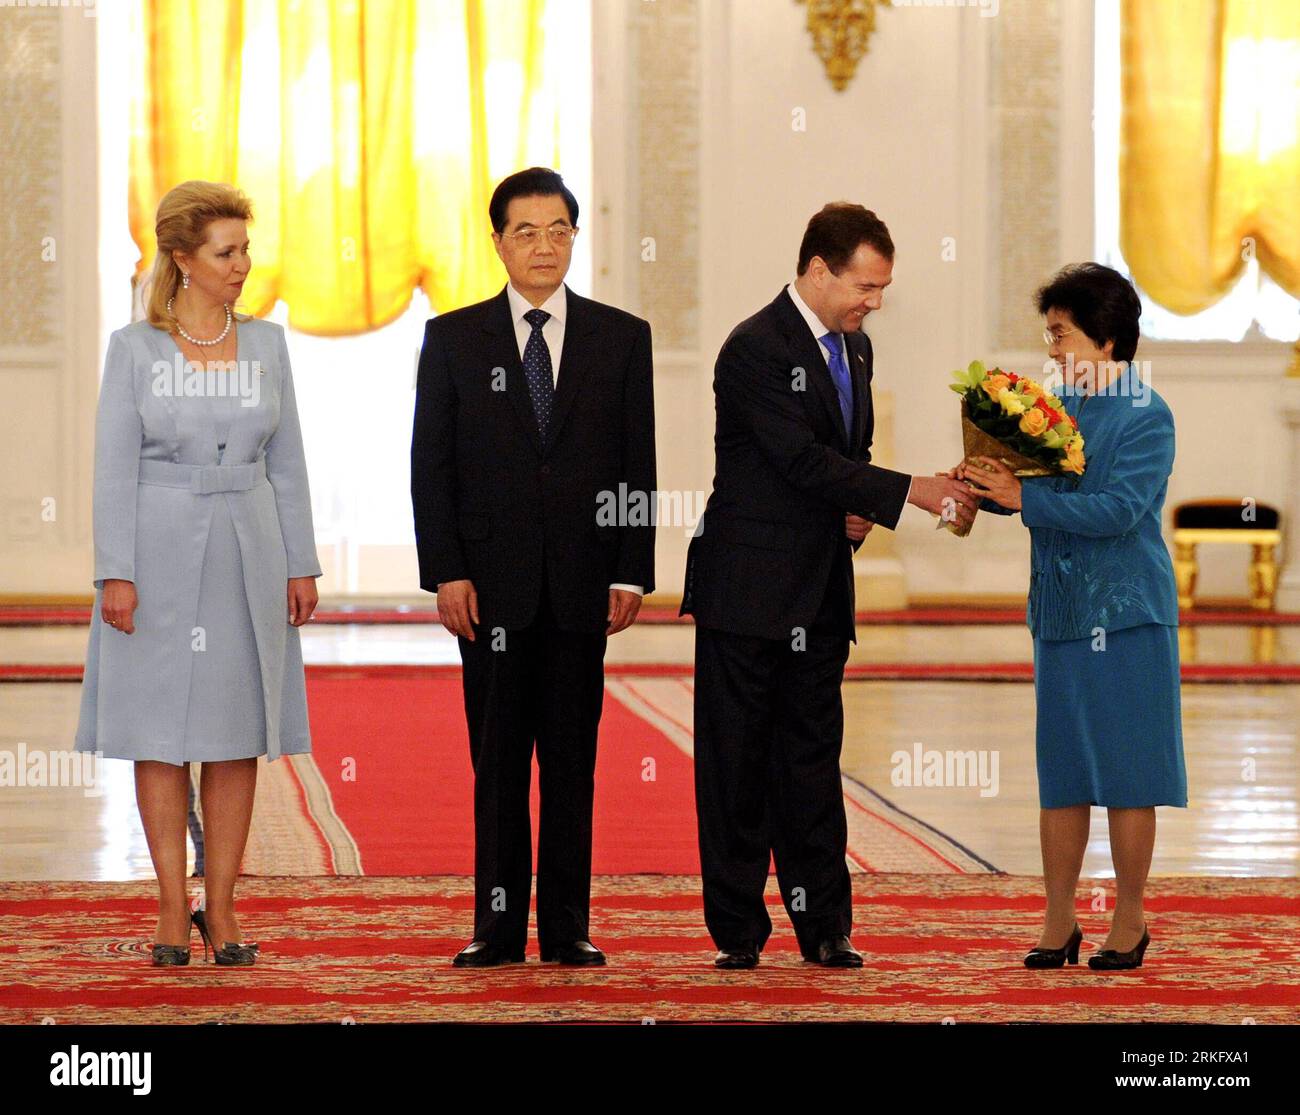 Bildnummer: 55464842  Datum: 17.06.2011  Copyright: imago/Xinhua (110616) -- MOSCOW, June 16, 2011 (Xinhua) -- Visiting Chinese President Hu Jintao (2nd L), his wife Liu Yongqing (1st R), Russian President Dmitry Medvedev (2nd R) and his wife Svetlana Medvedeva (1st L) attend a welcome ceremony in Moscow, capital of Russia, June 16, 2011. (Xinhua/Rao Aimin) (zn) RUSSIA-CHINA-HU JINTAO-DMITRY MEDVEDEV-WELCOME CEREMONY (CN) PUBLICATIONxNOTxINxCHN People Politik Staatsbesuch xcb x0x 2011 quer     Bildnummer 55464842 Date 17 06 2011 Copyright Imago XINHUA  Moscow June 16 2011 XINHUA Visiting Chine Stock Photo